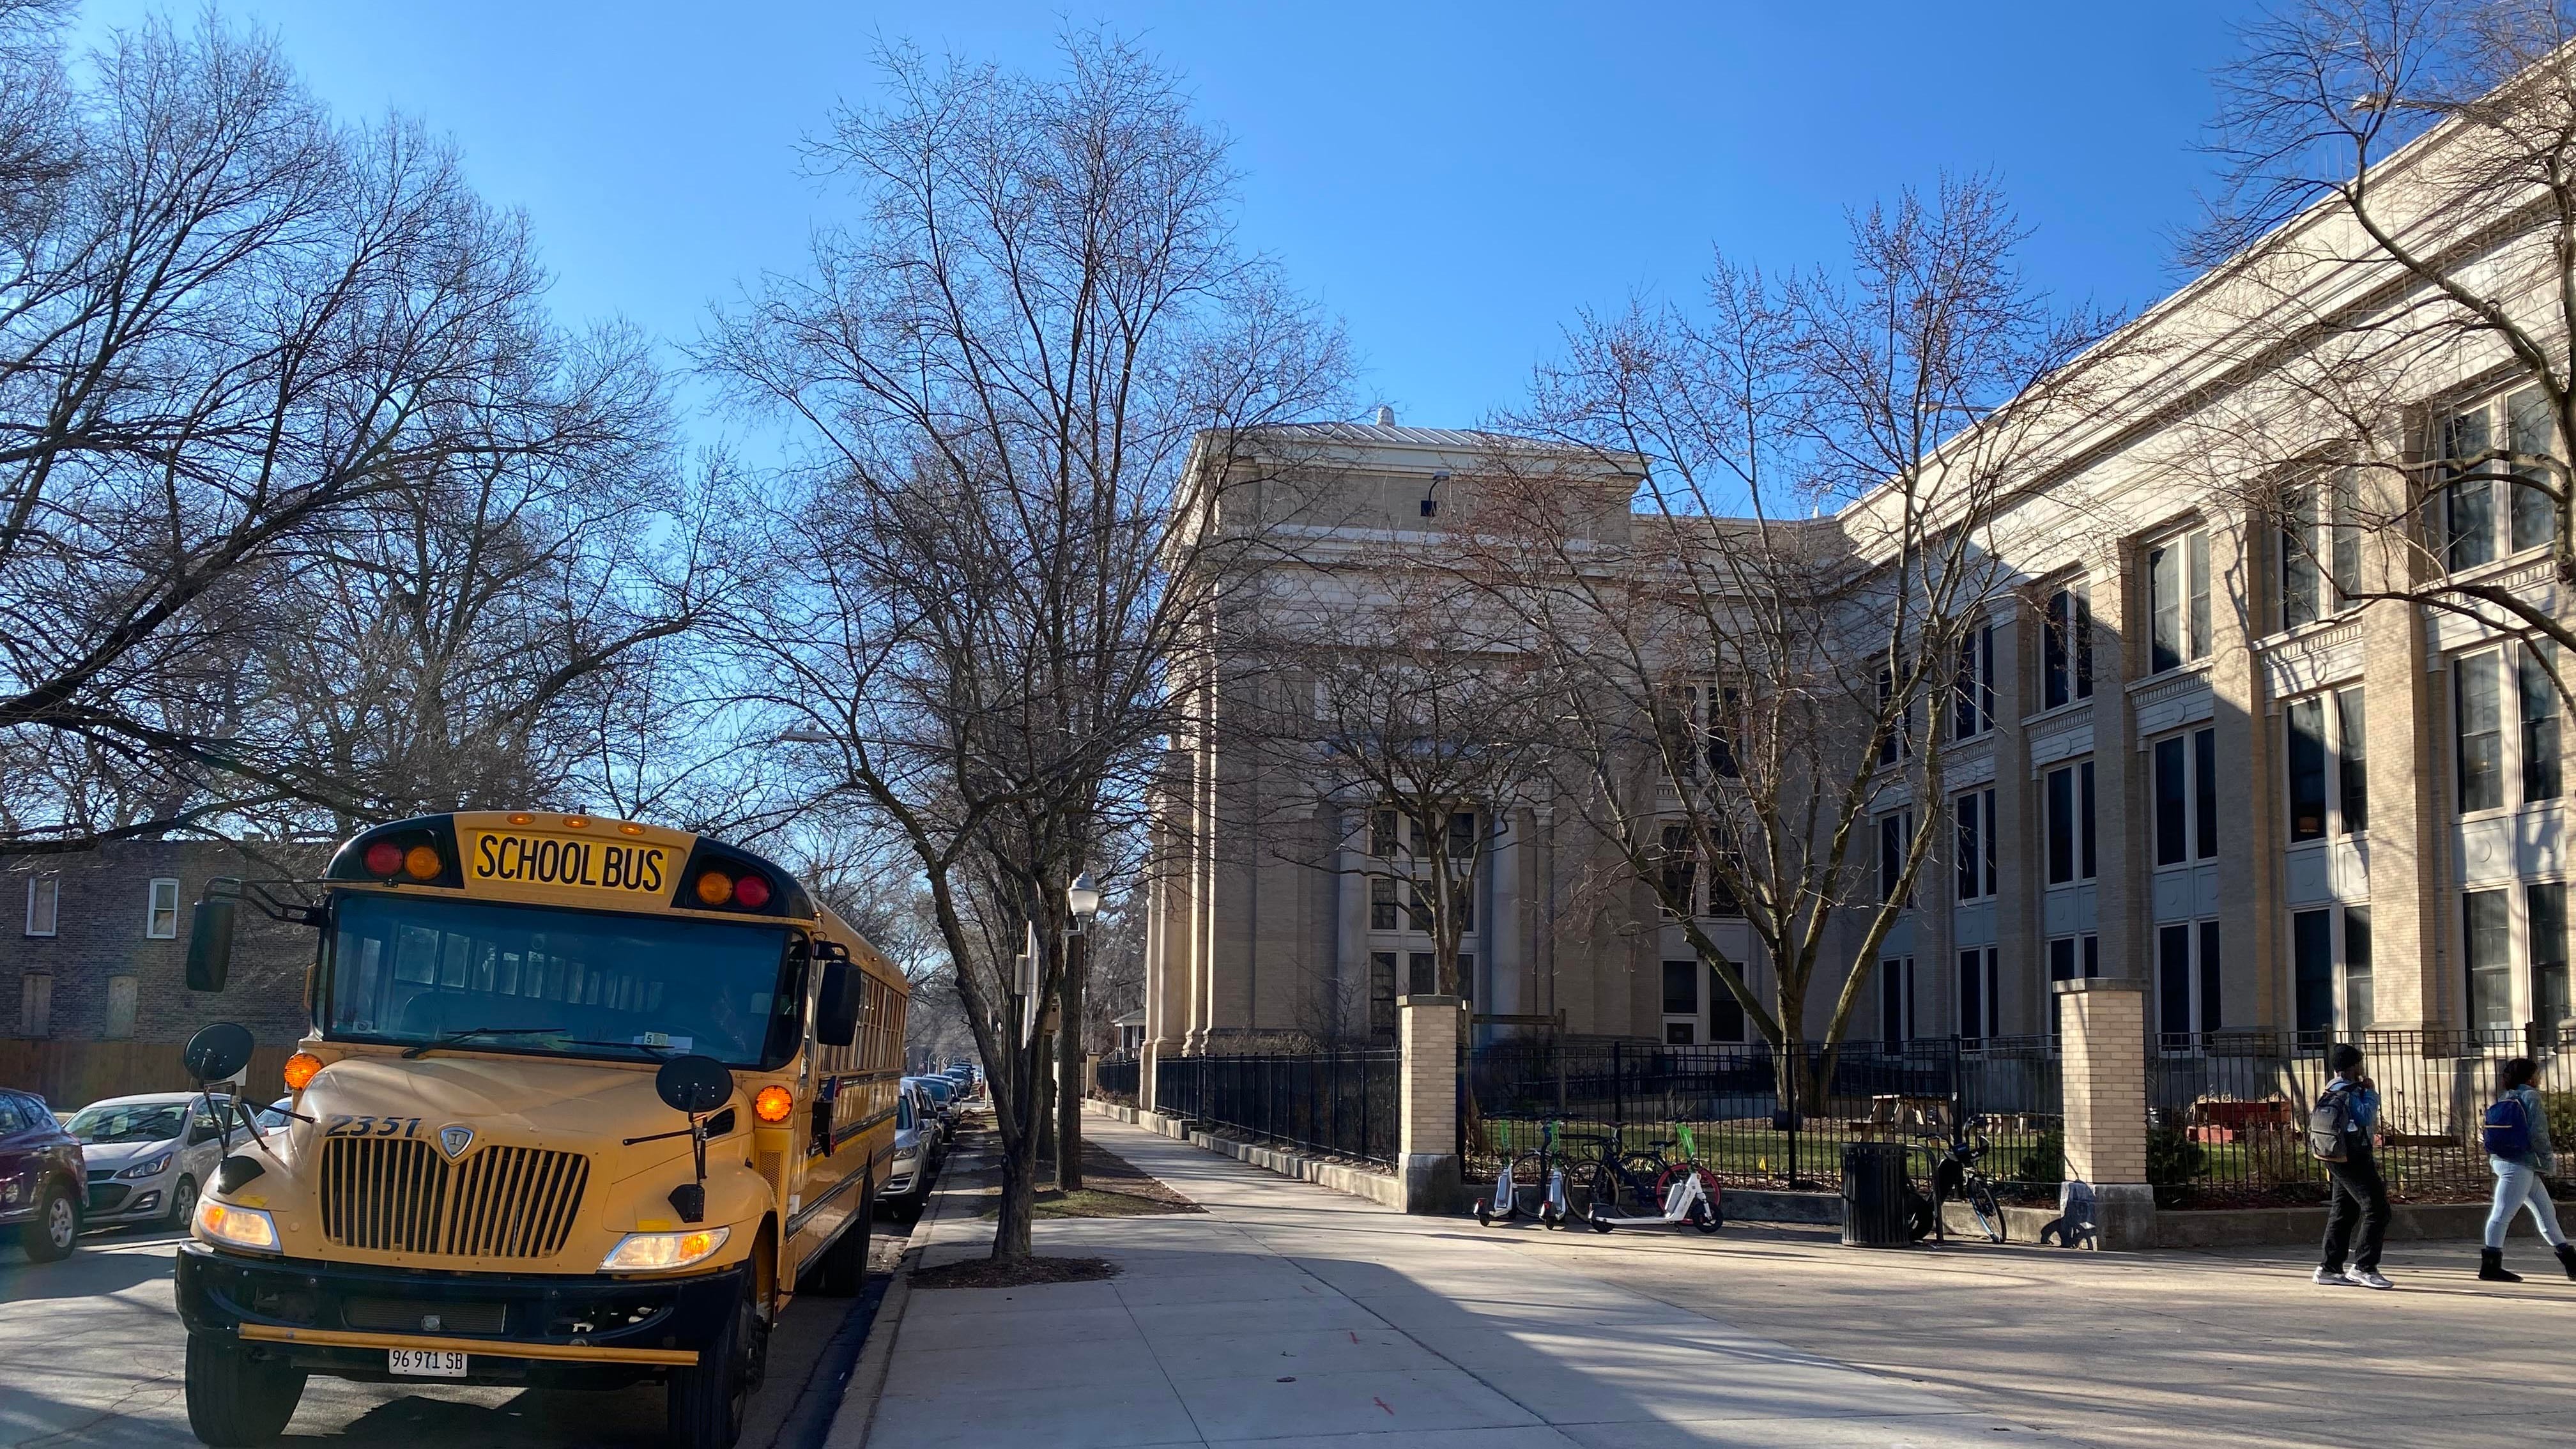 A yellow school bus is parked outside of a large stone building with a large sidewalk in the foreground and blue sky in the background.